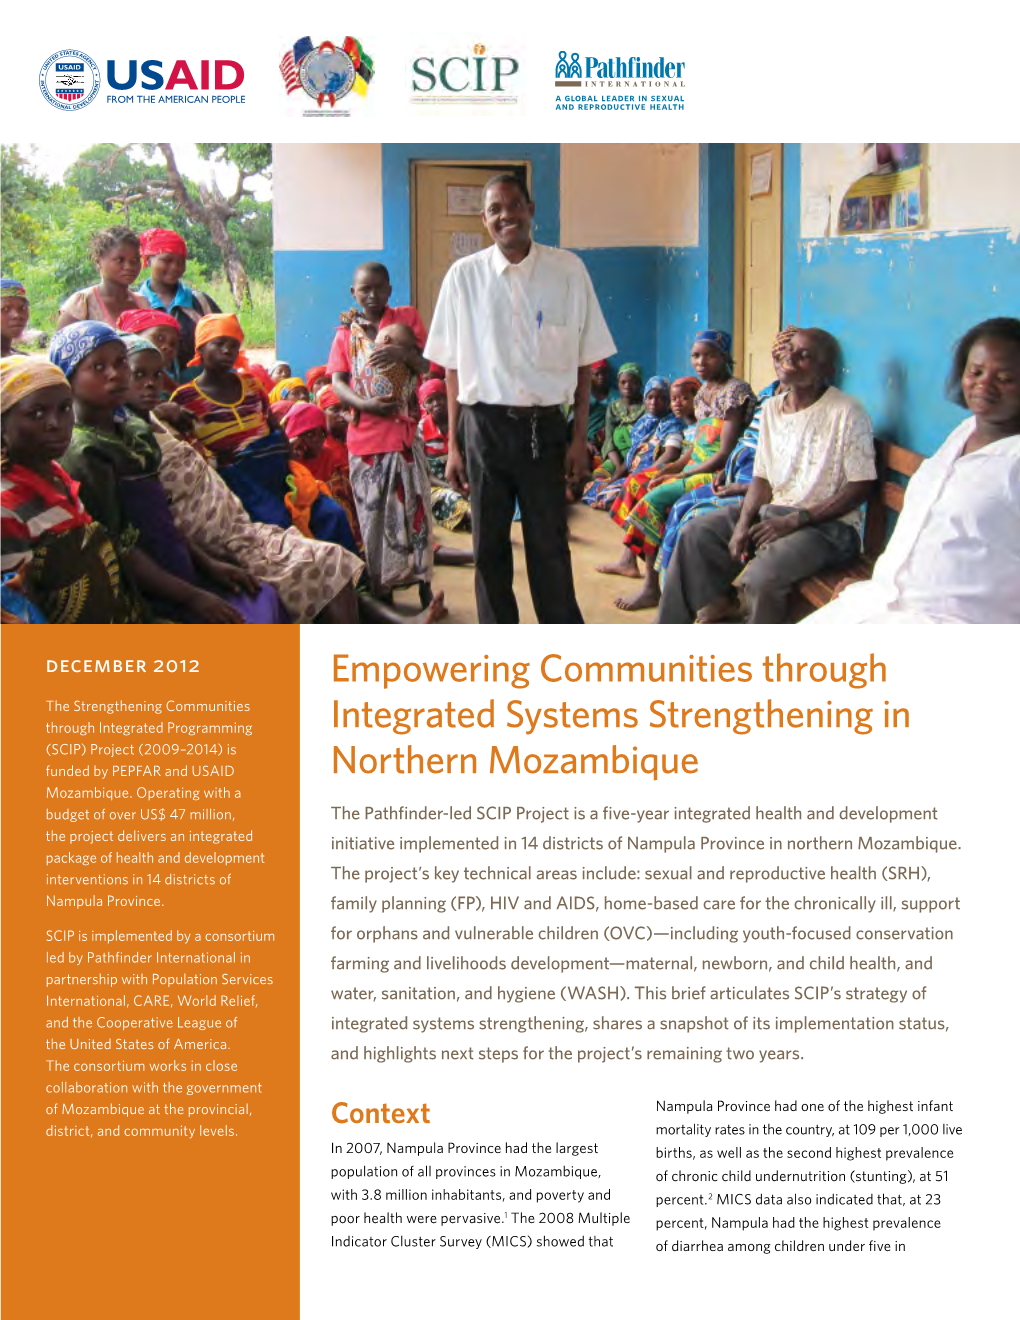 Empowering Communities Through Integrated Systems Strengthening